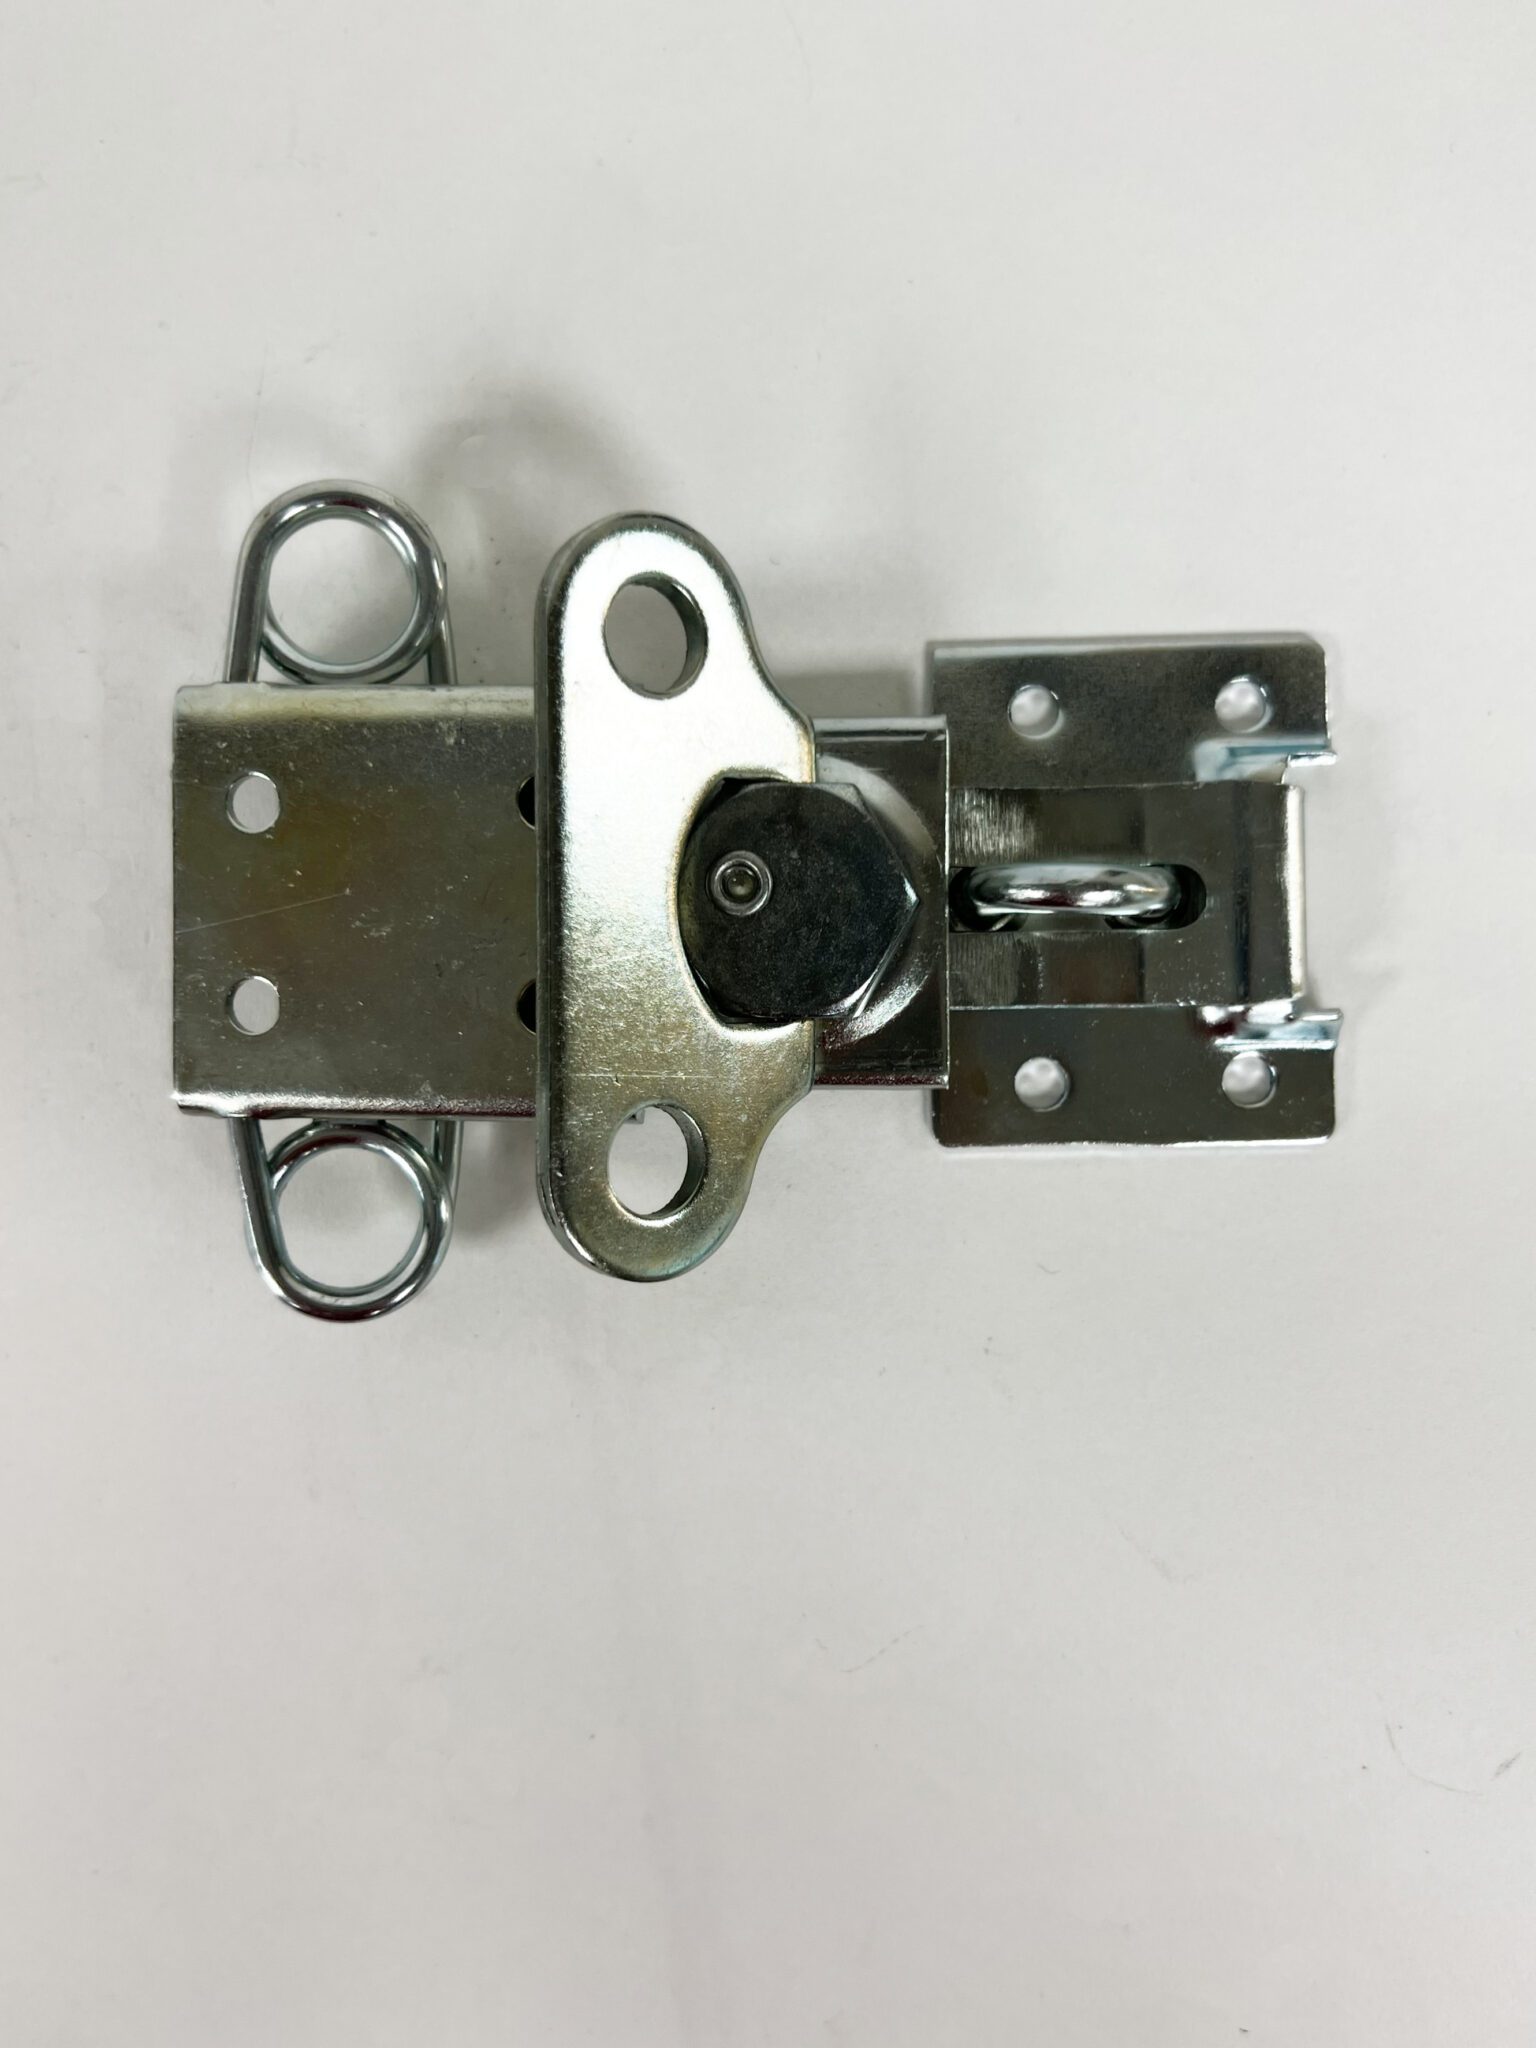 A metal latch with two hooks attached to it.